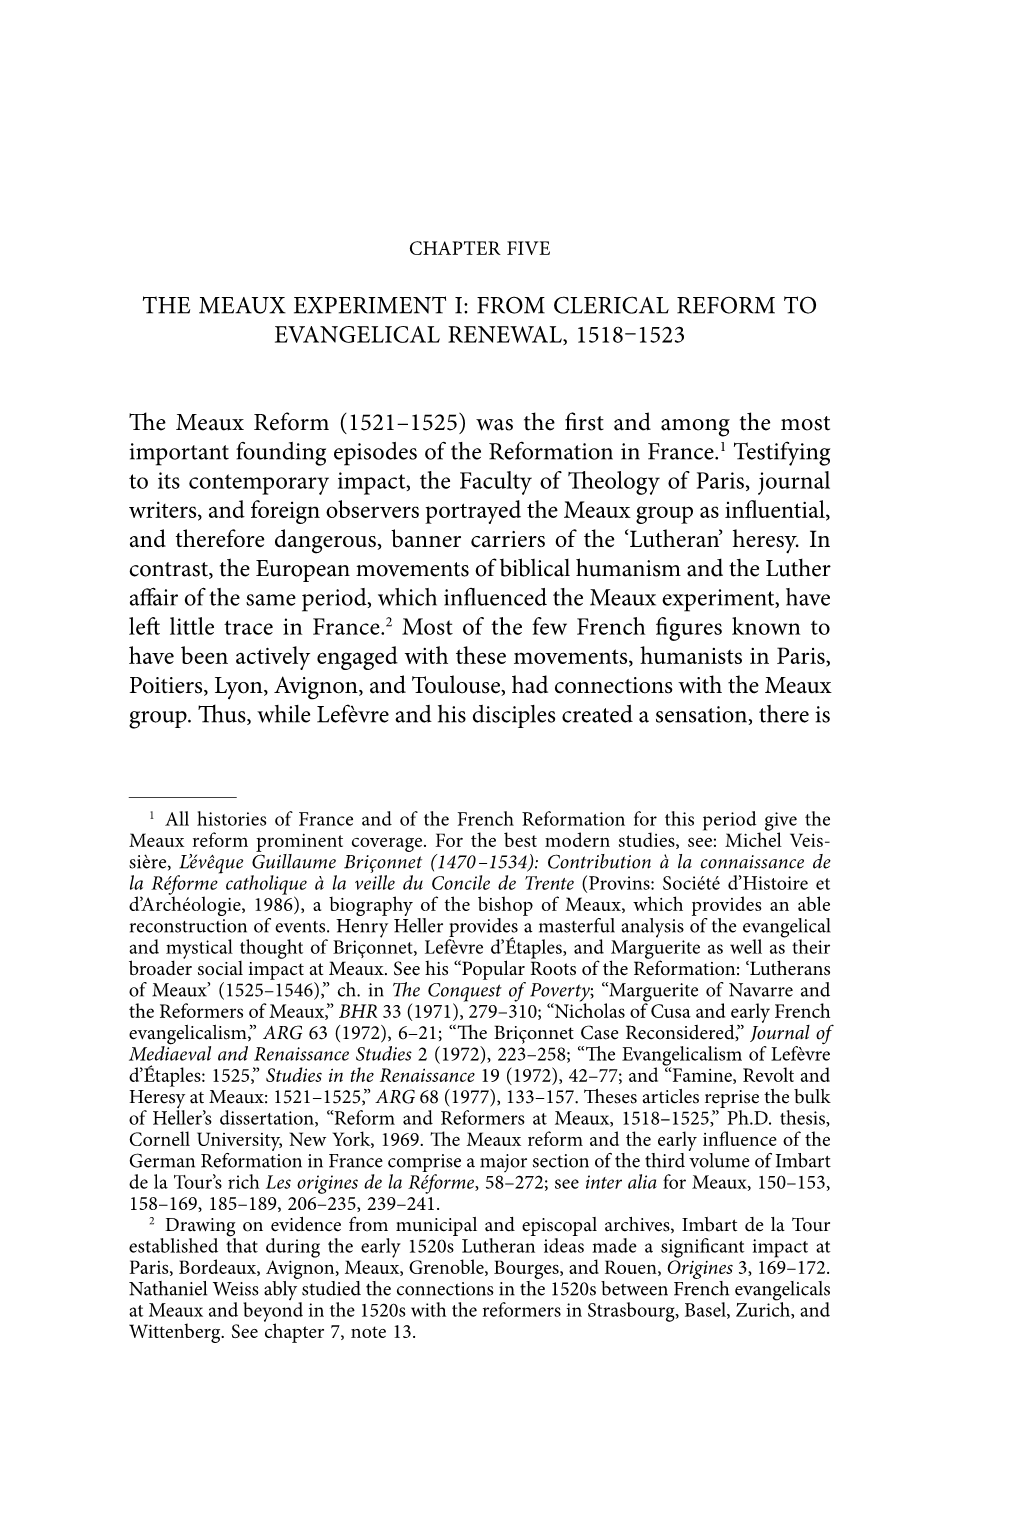 The Meaux Experiment I: from Clerical Reform to Evangelical Renewal, 15181523